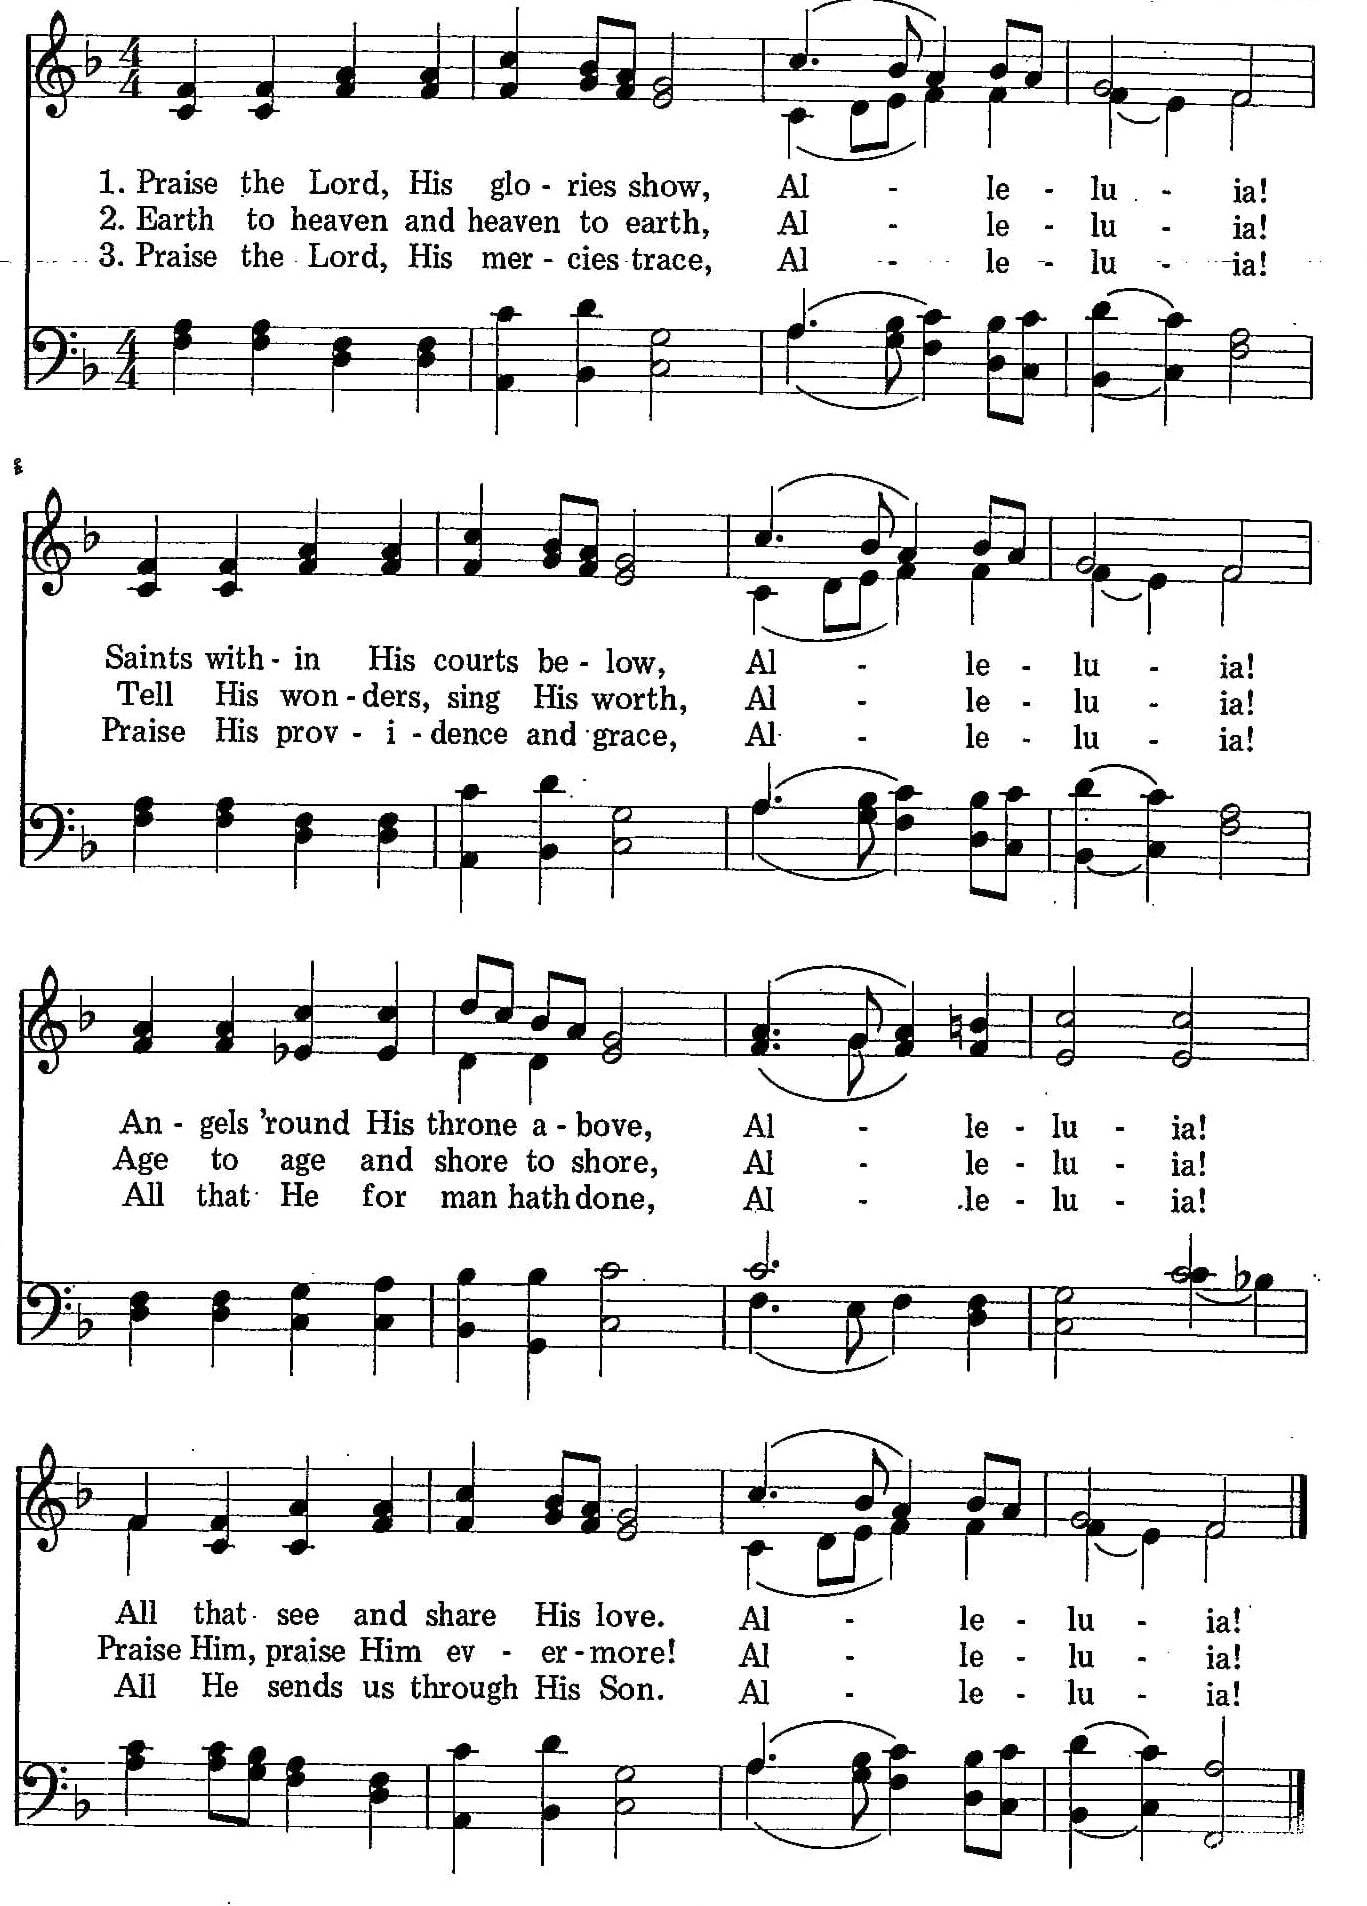 025 – Praise the Lord His Glories Show sheet music